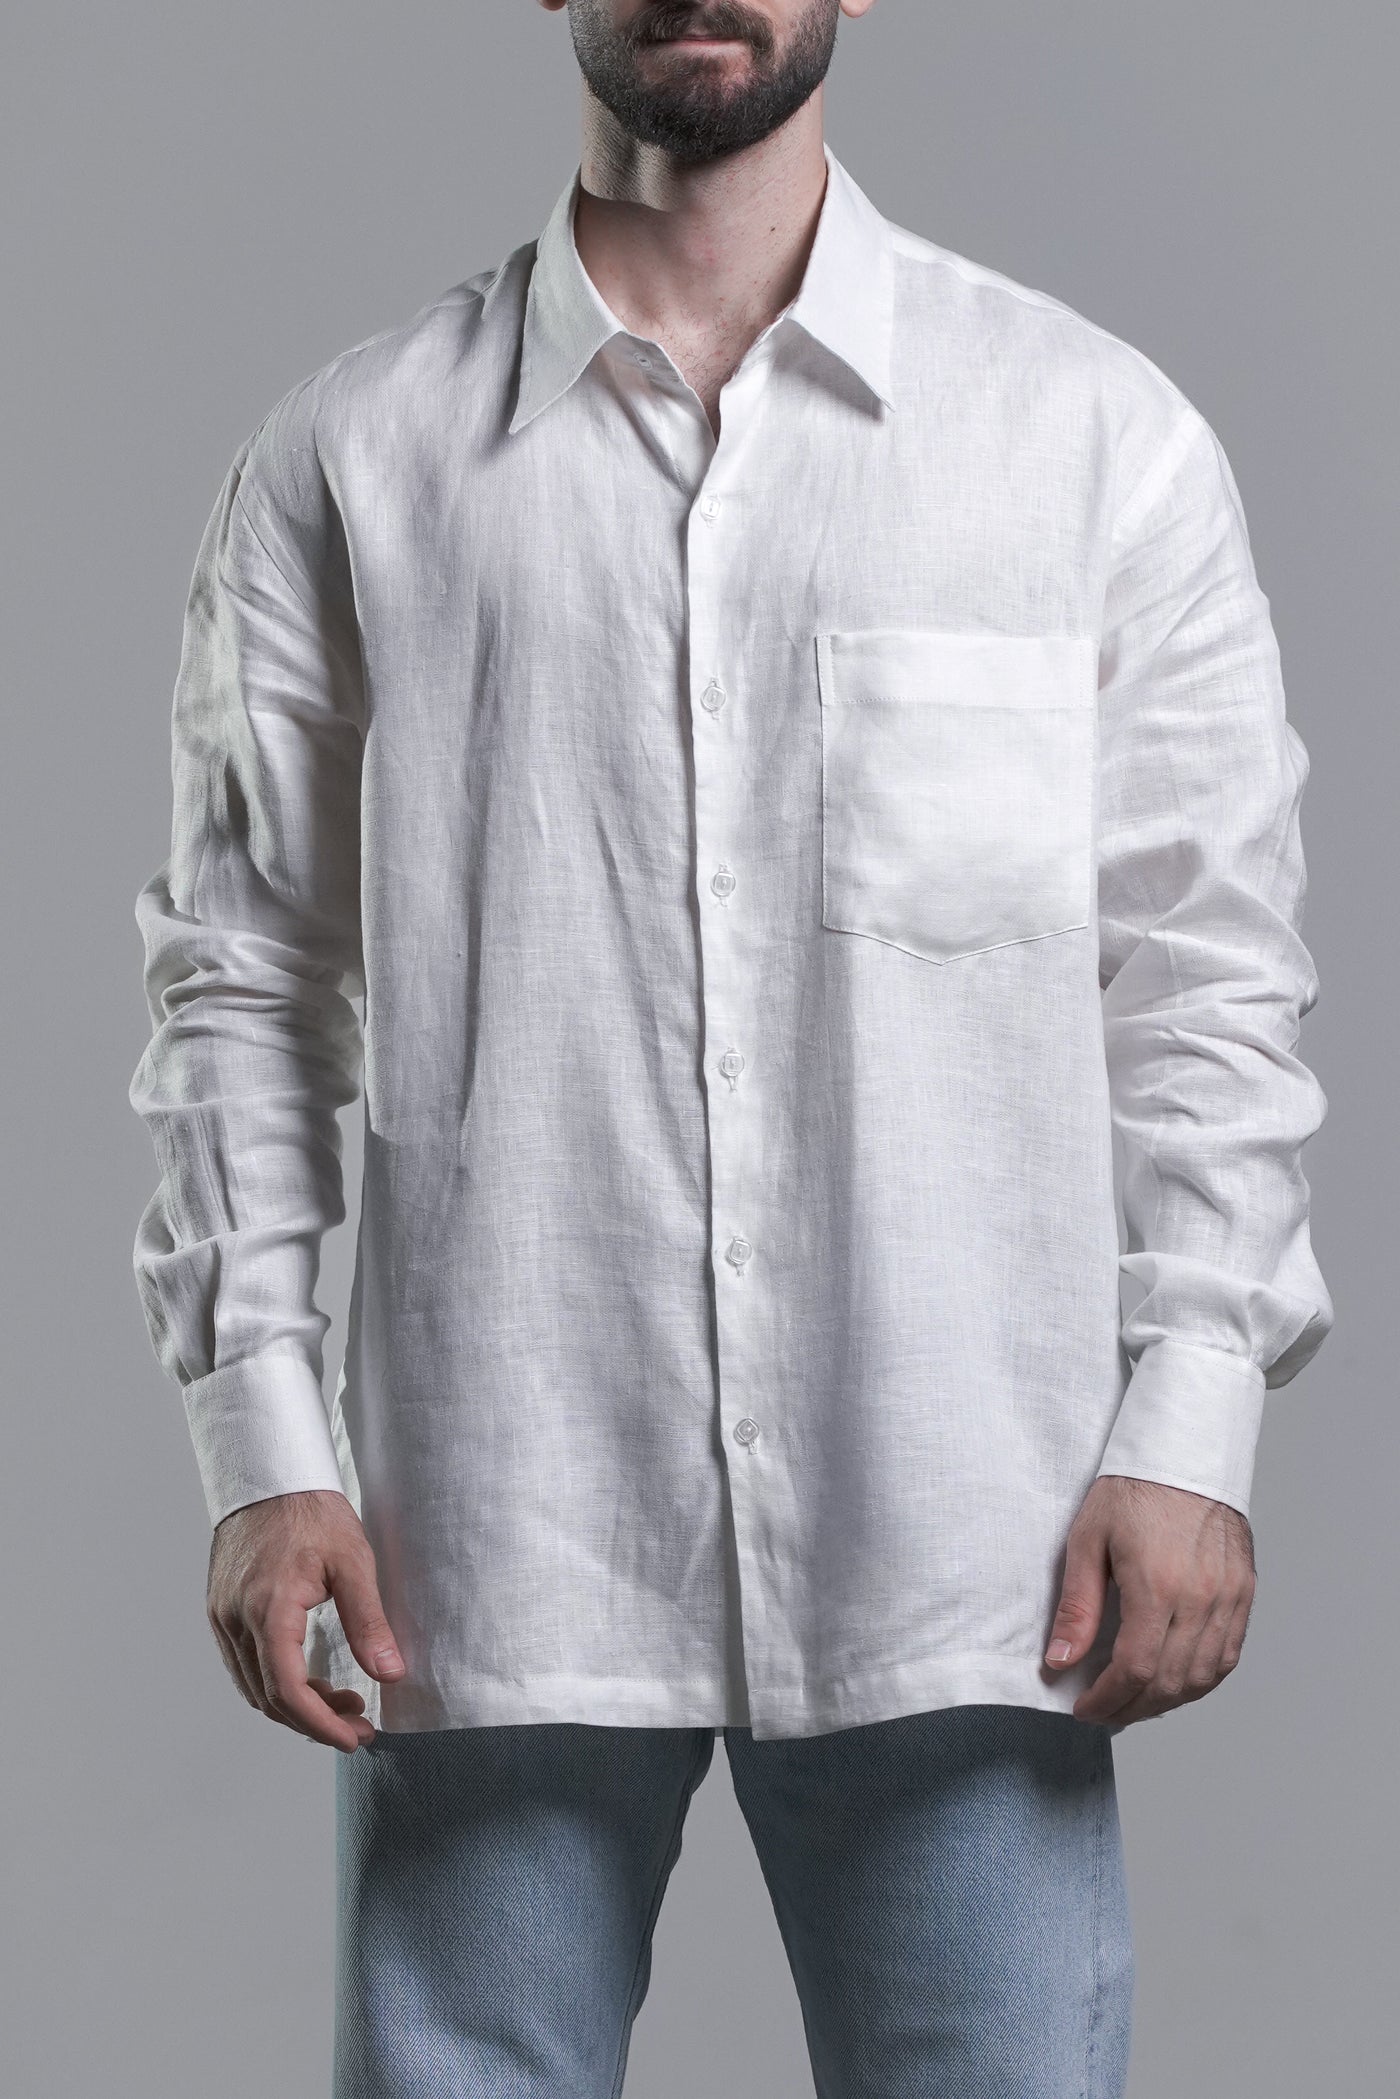 White Linen Shirt with pocket